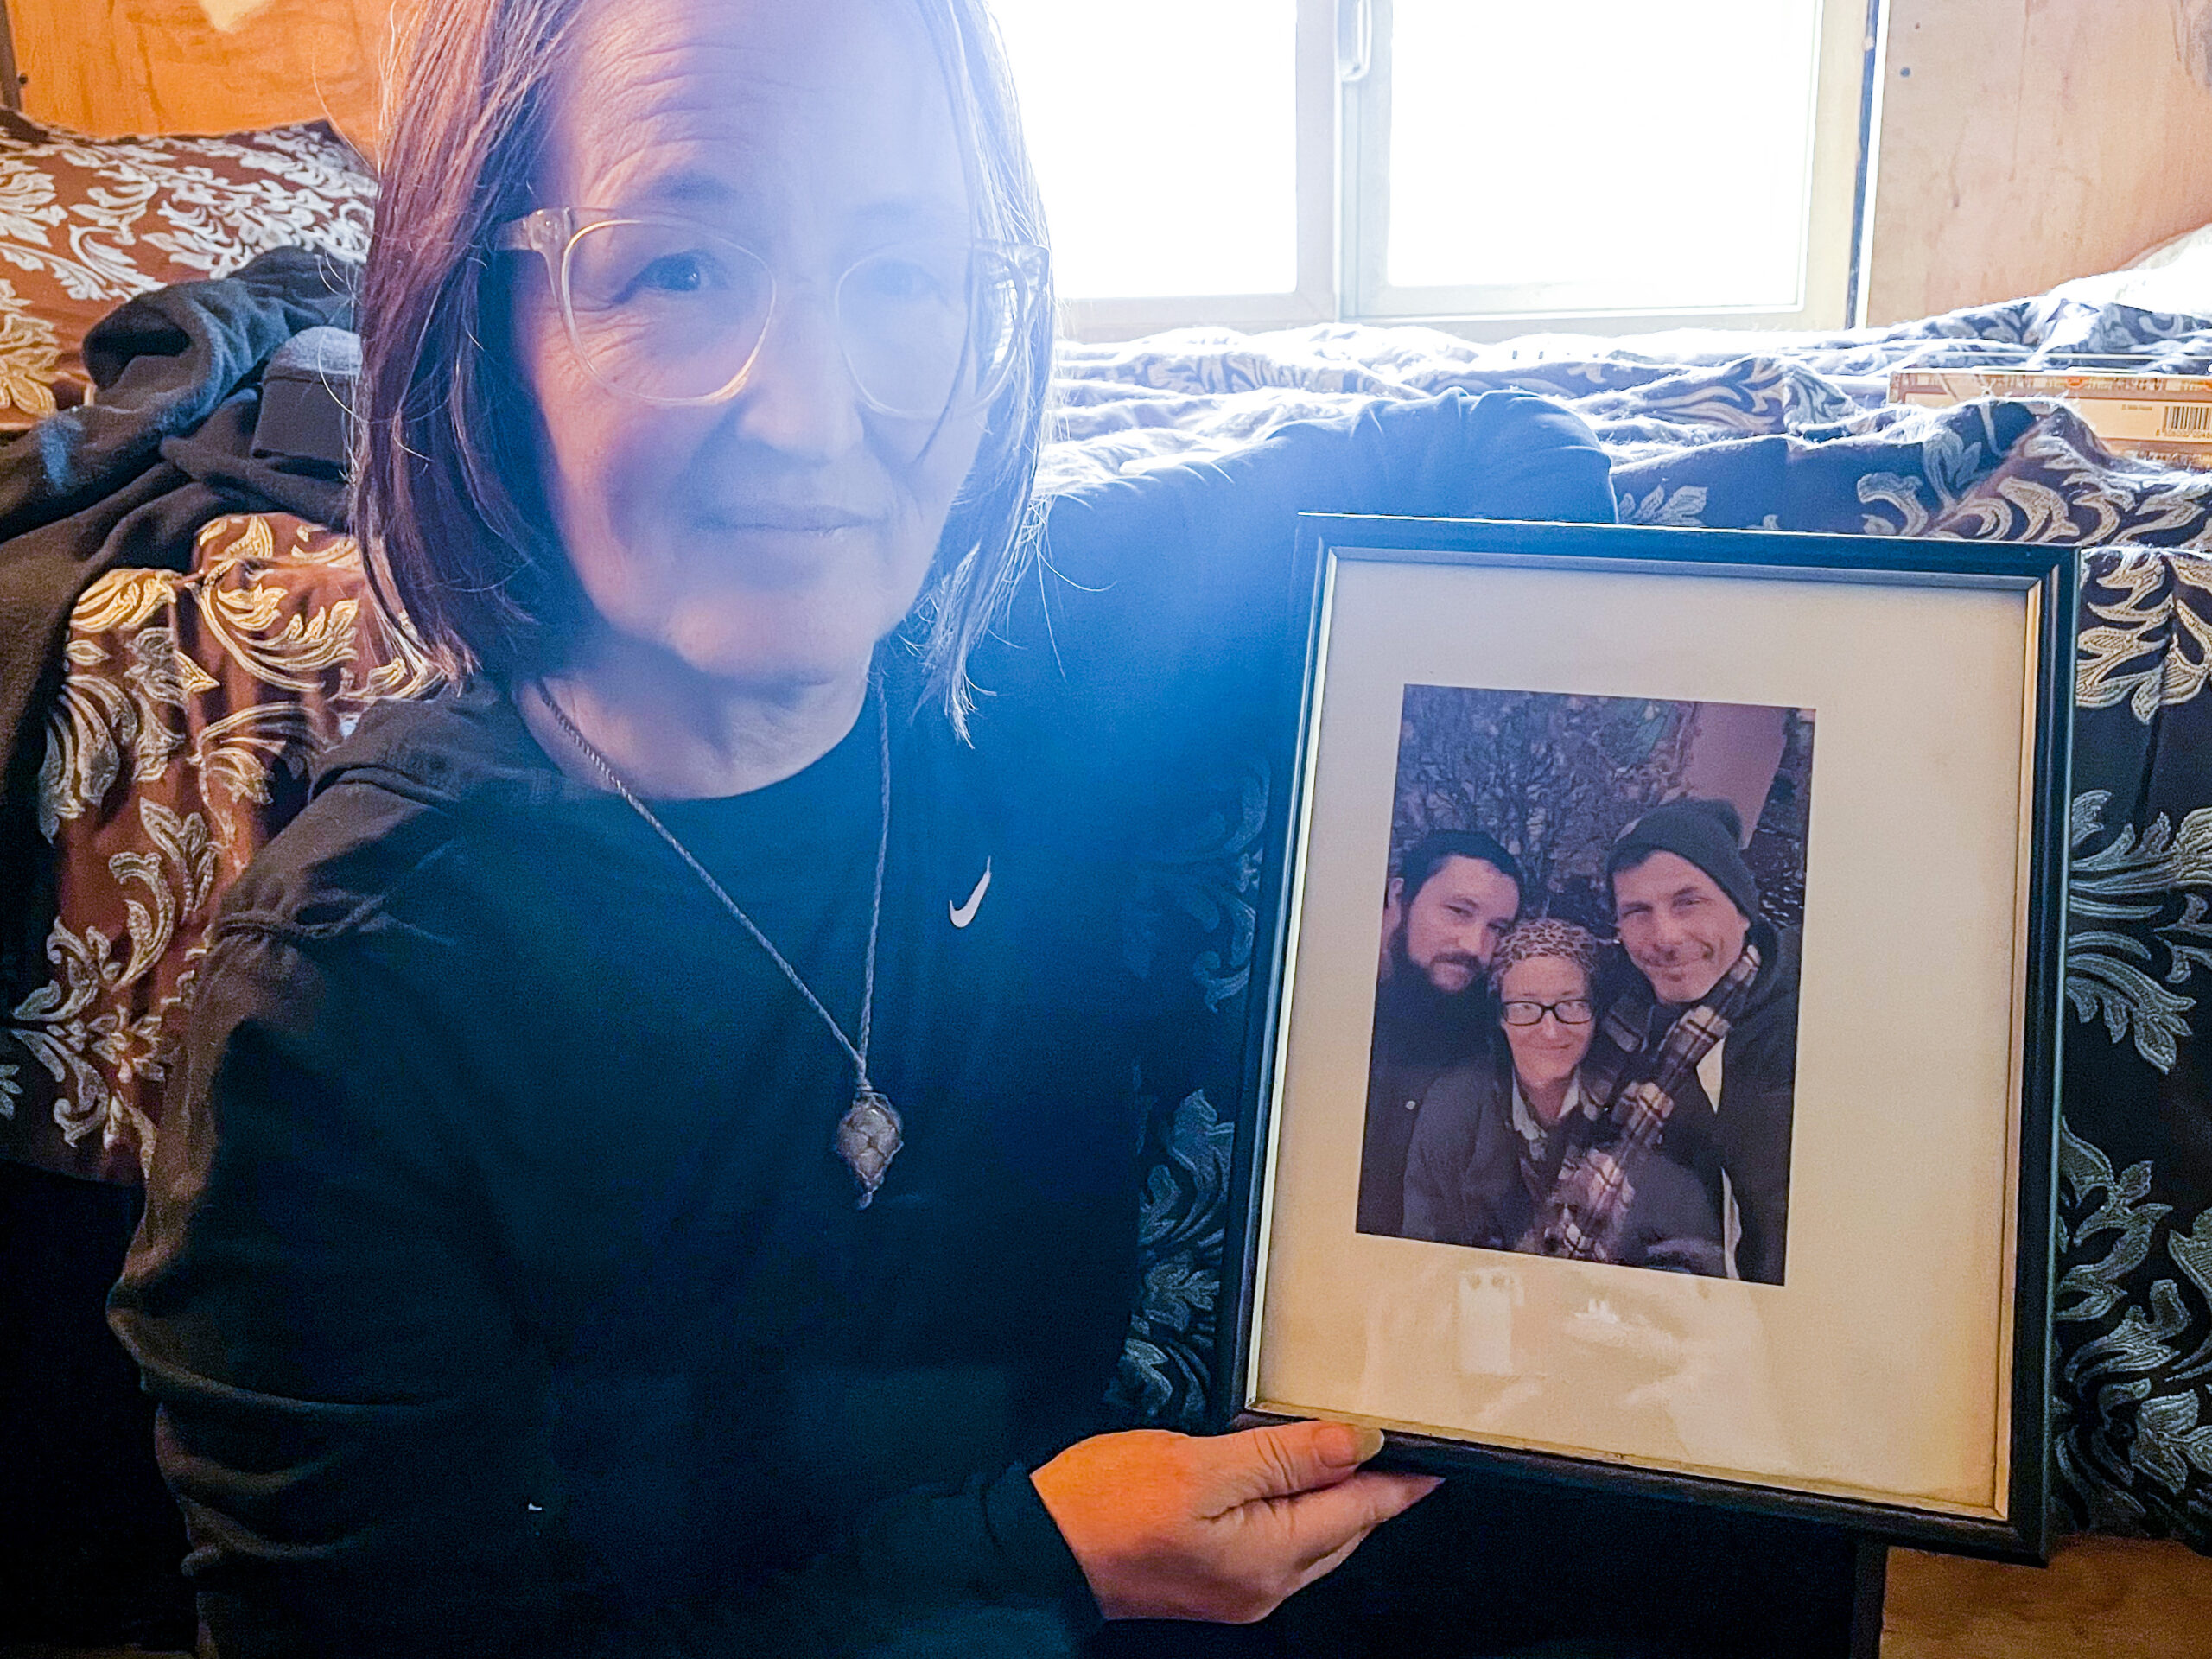 Barbra Weber stands next to her bed holding a framed photograph of herself and her son James, who died from a fentanyl and methamphetamine overdose in 2022.